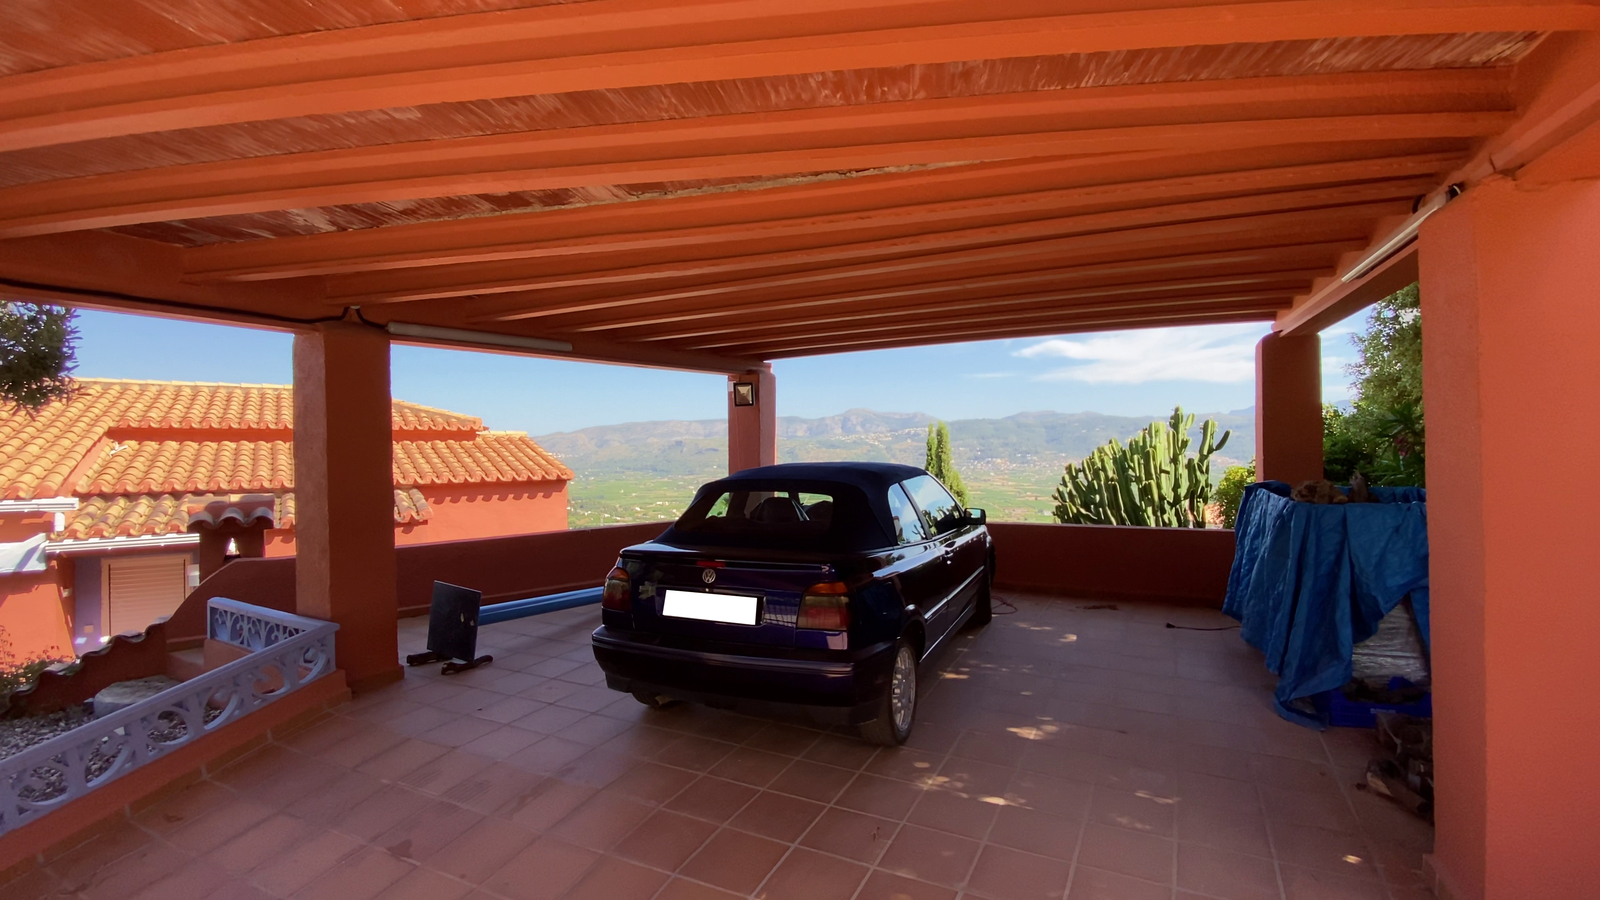 Villa with 2 residential units and unobstructed, unique views over the valley of Orba, to the Mediterranean Sea.